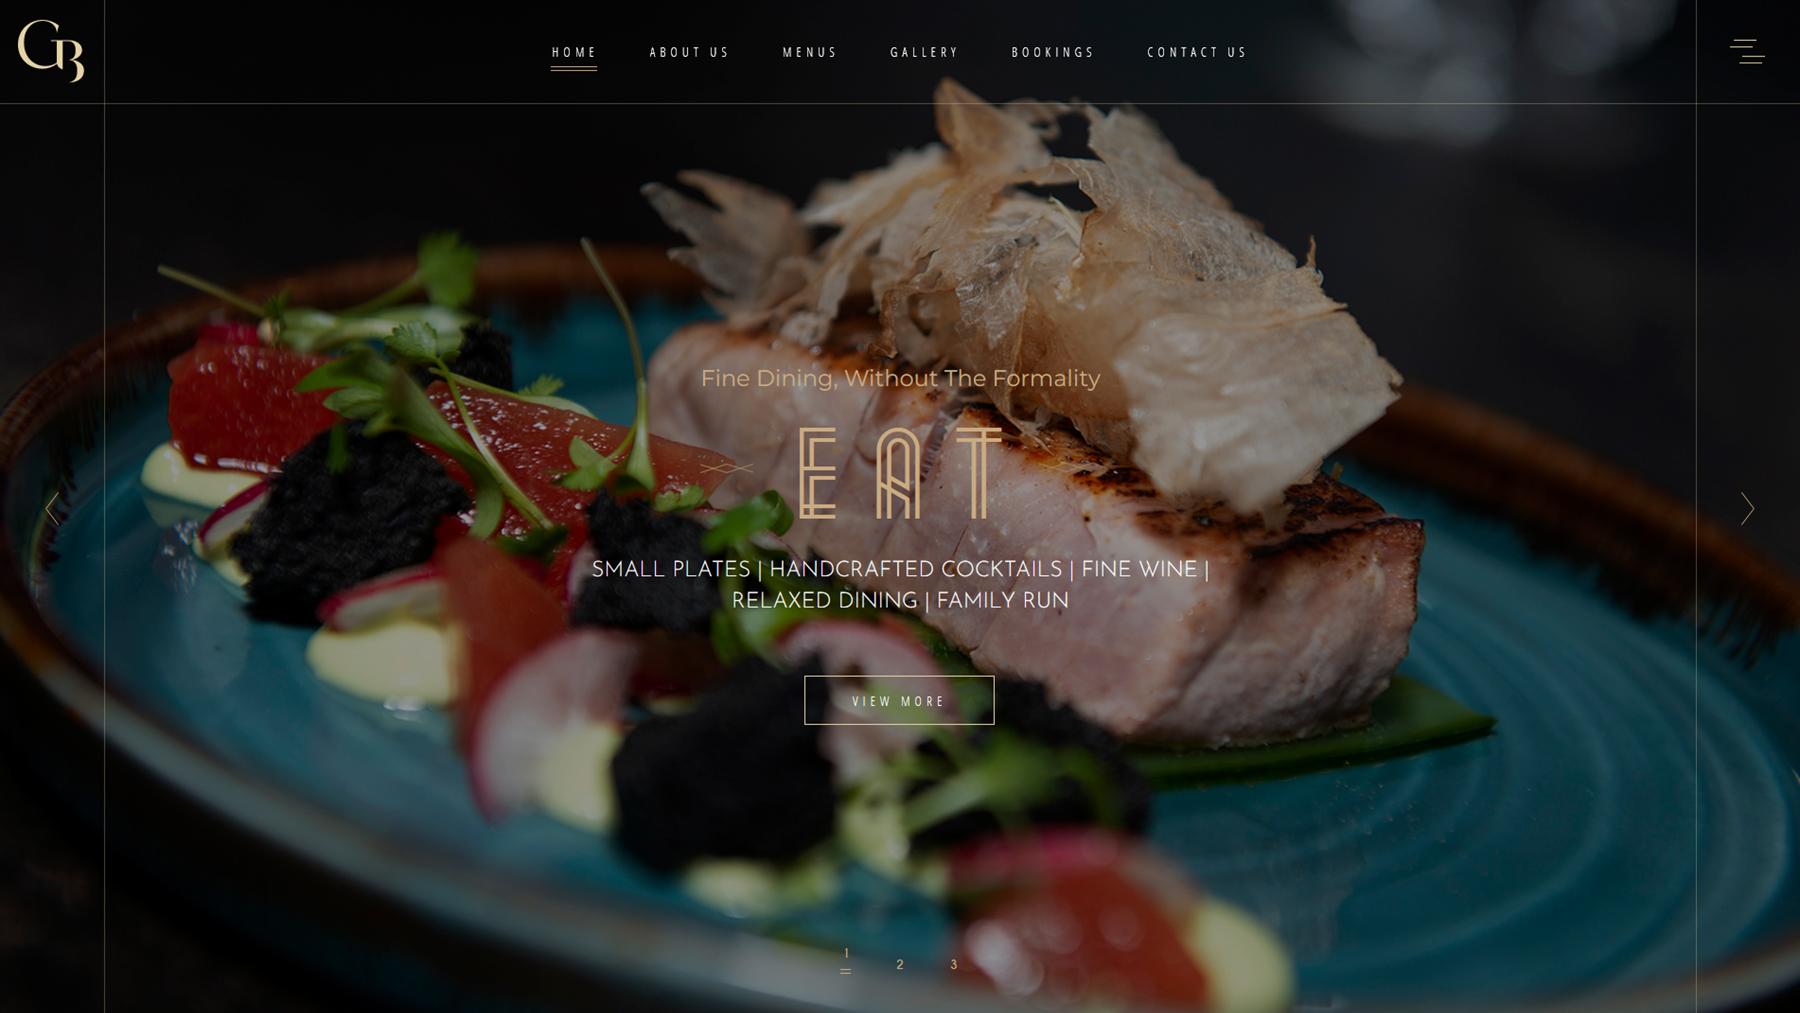 Homepage hero design for Chez Burton restaurant featuring a flaked salmon dish.